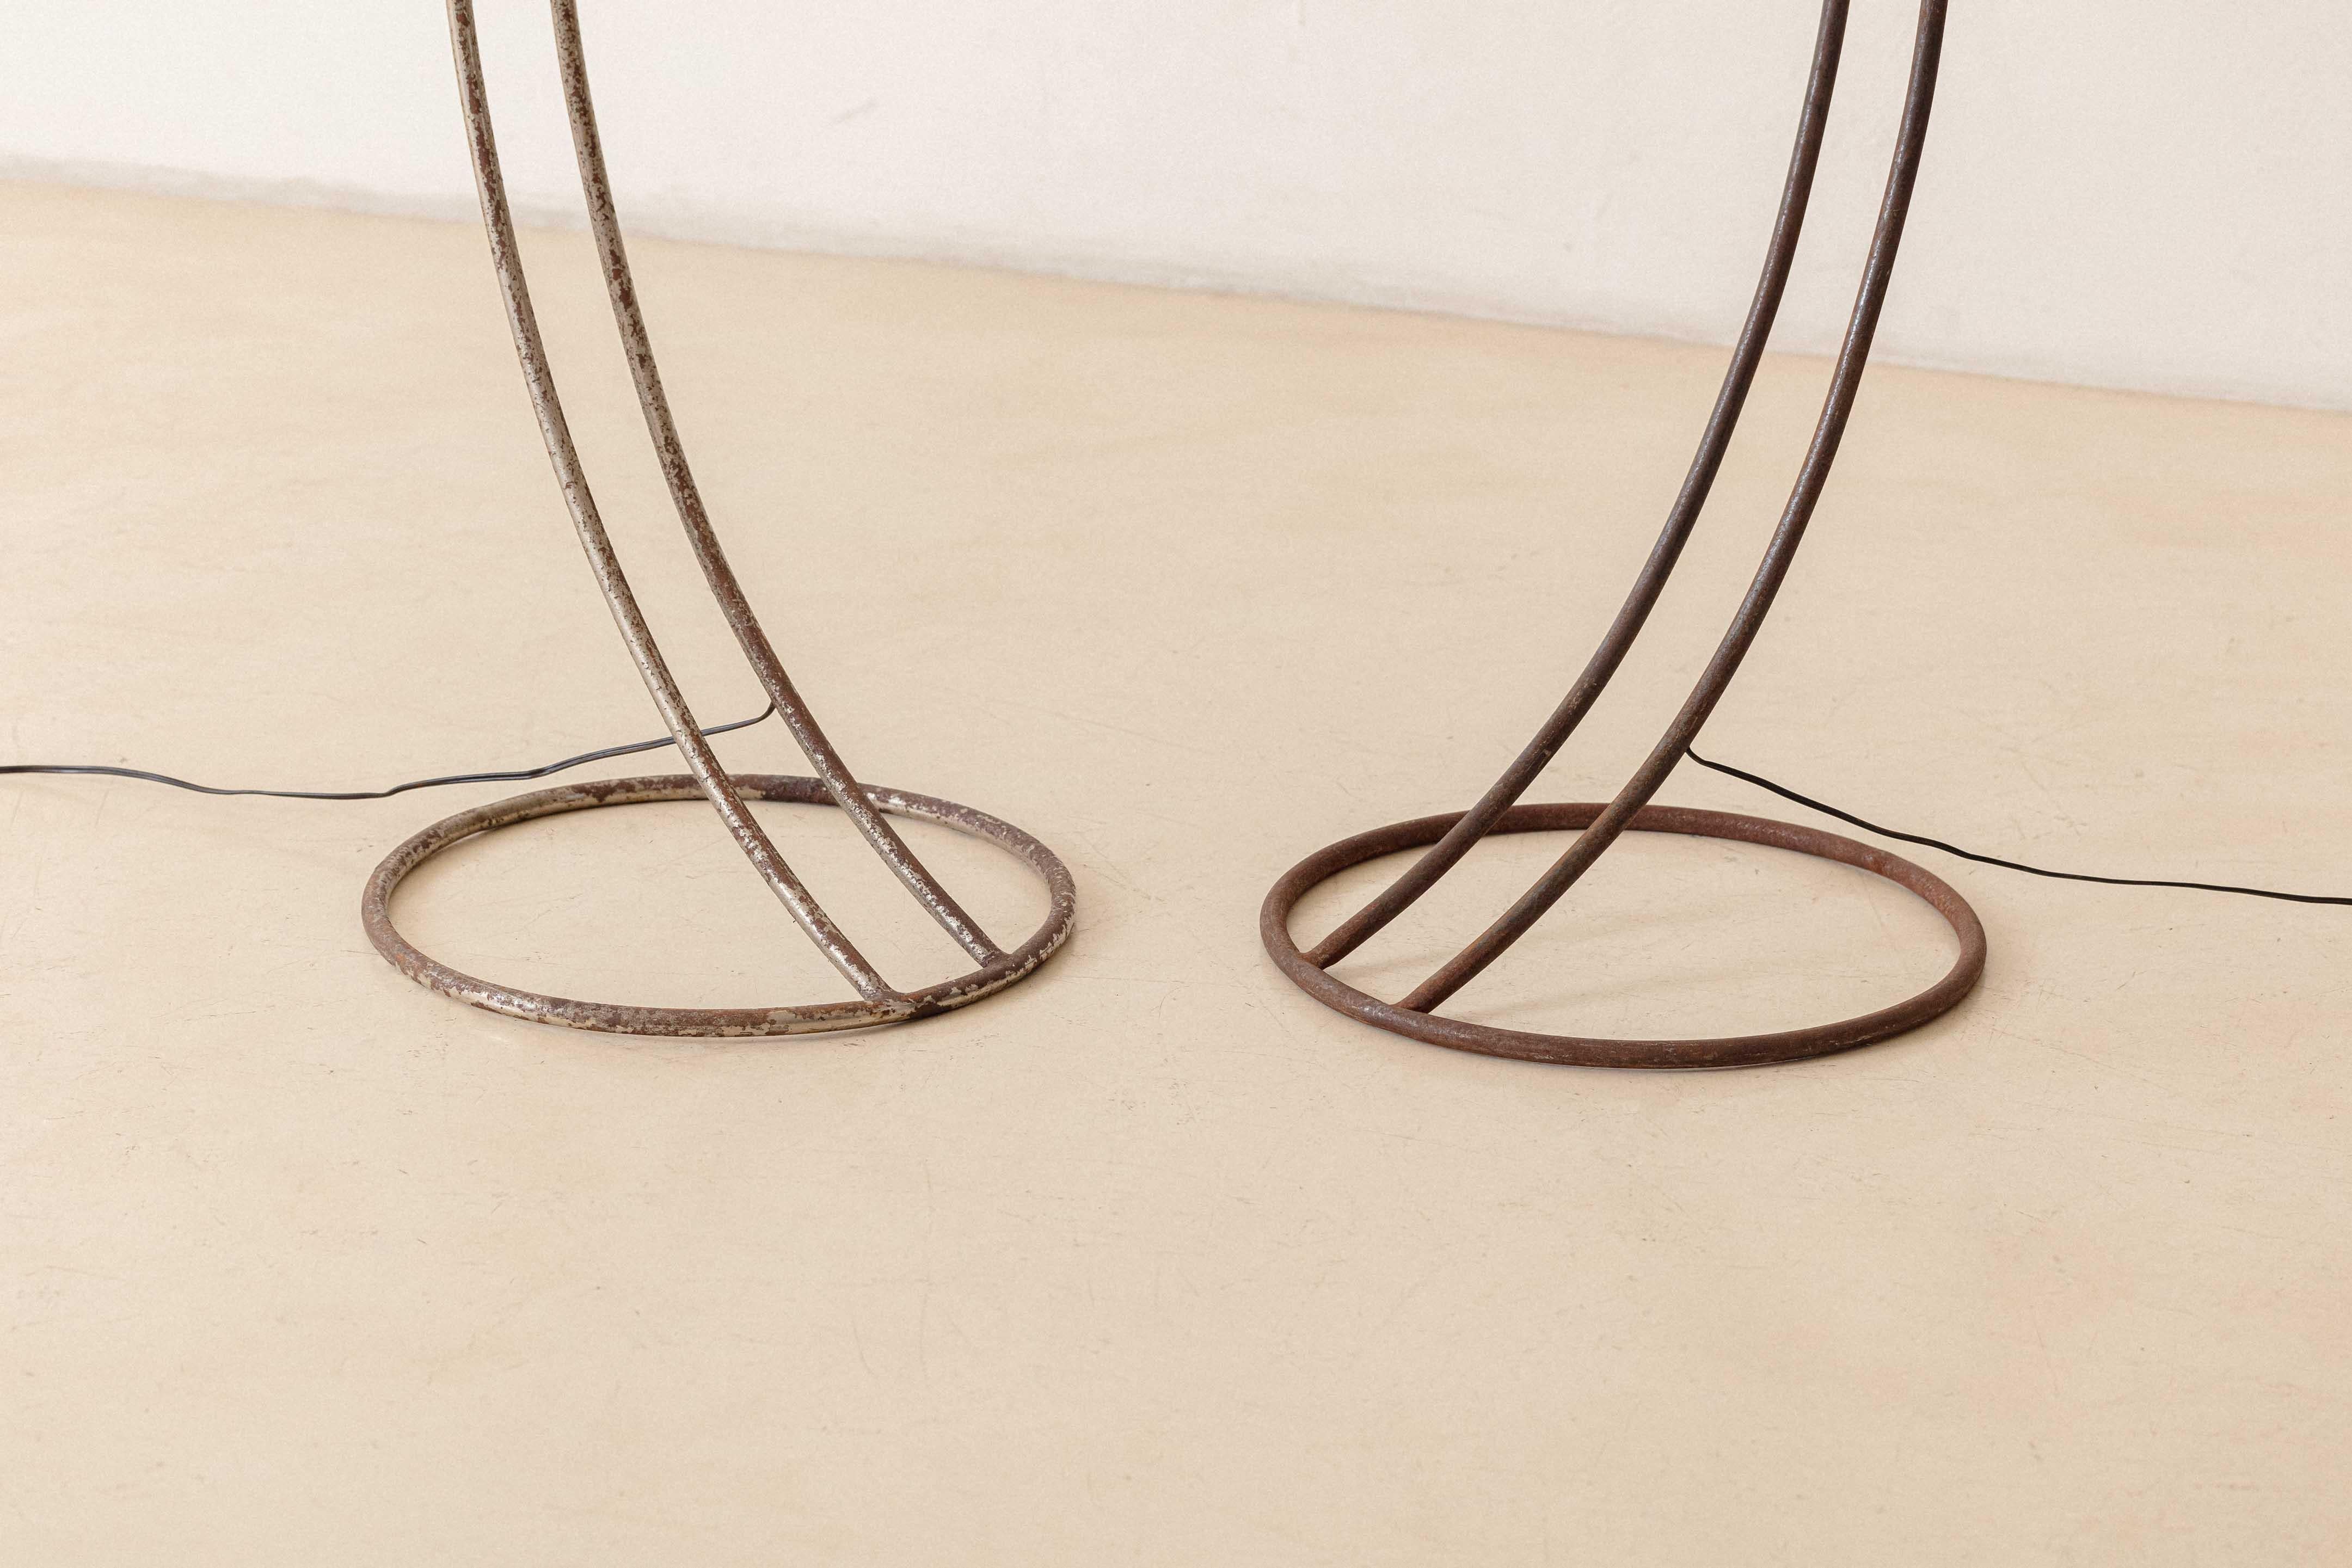 Pair of Italian Floor Lamps by Unknown Designer, 1950s, Gino Sarfatti Style For Sale 1